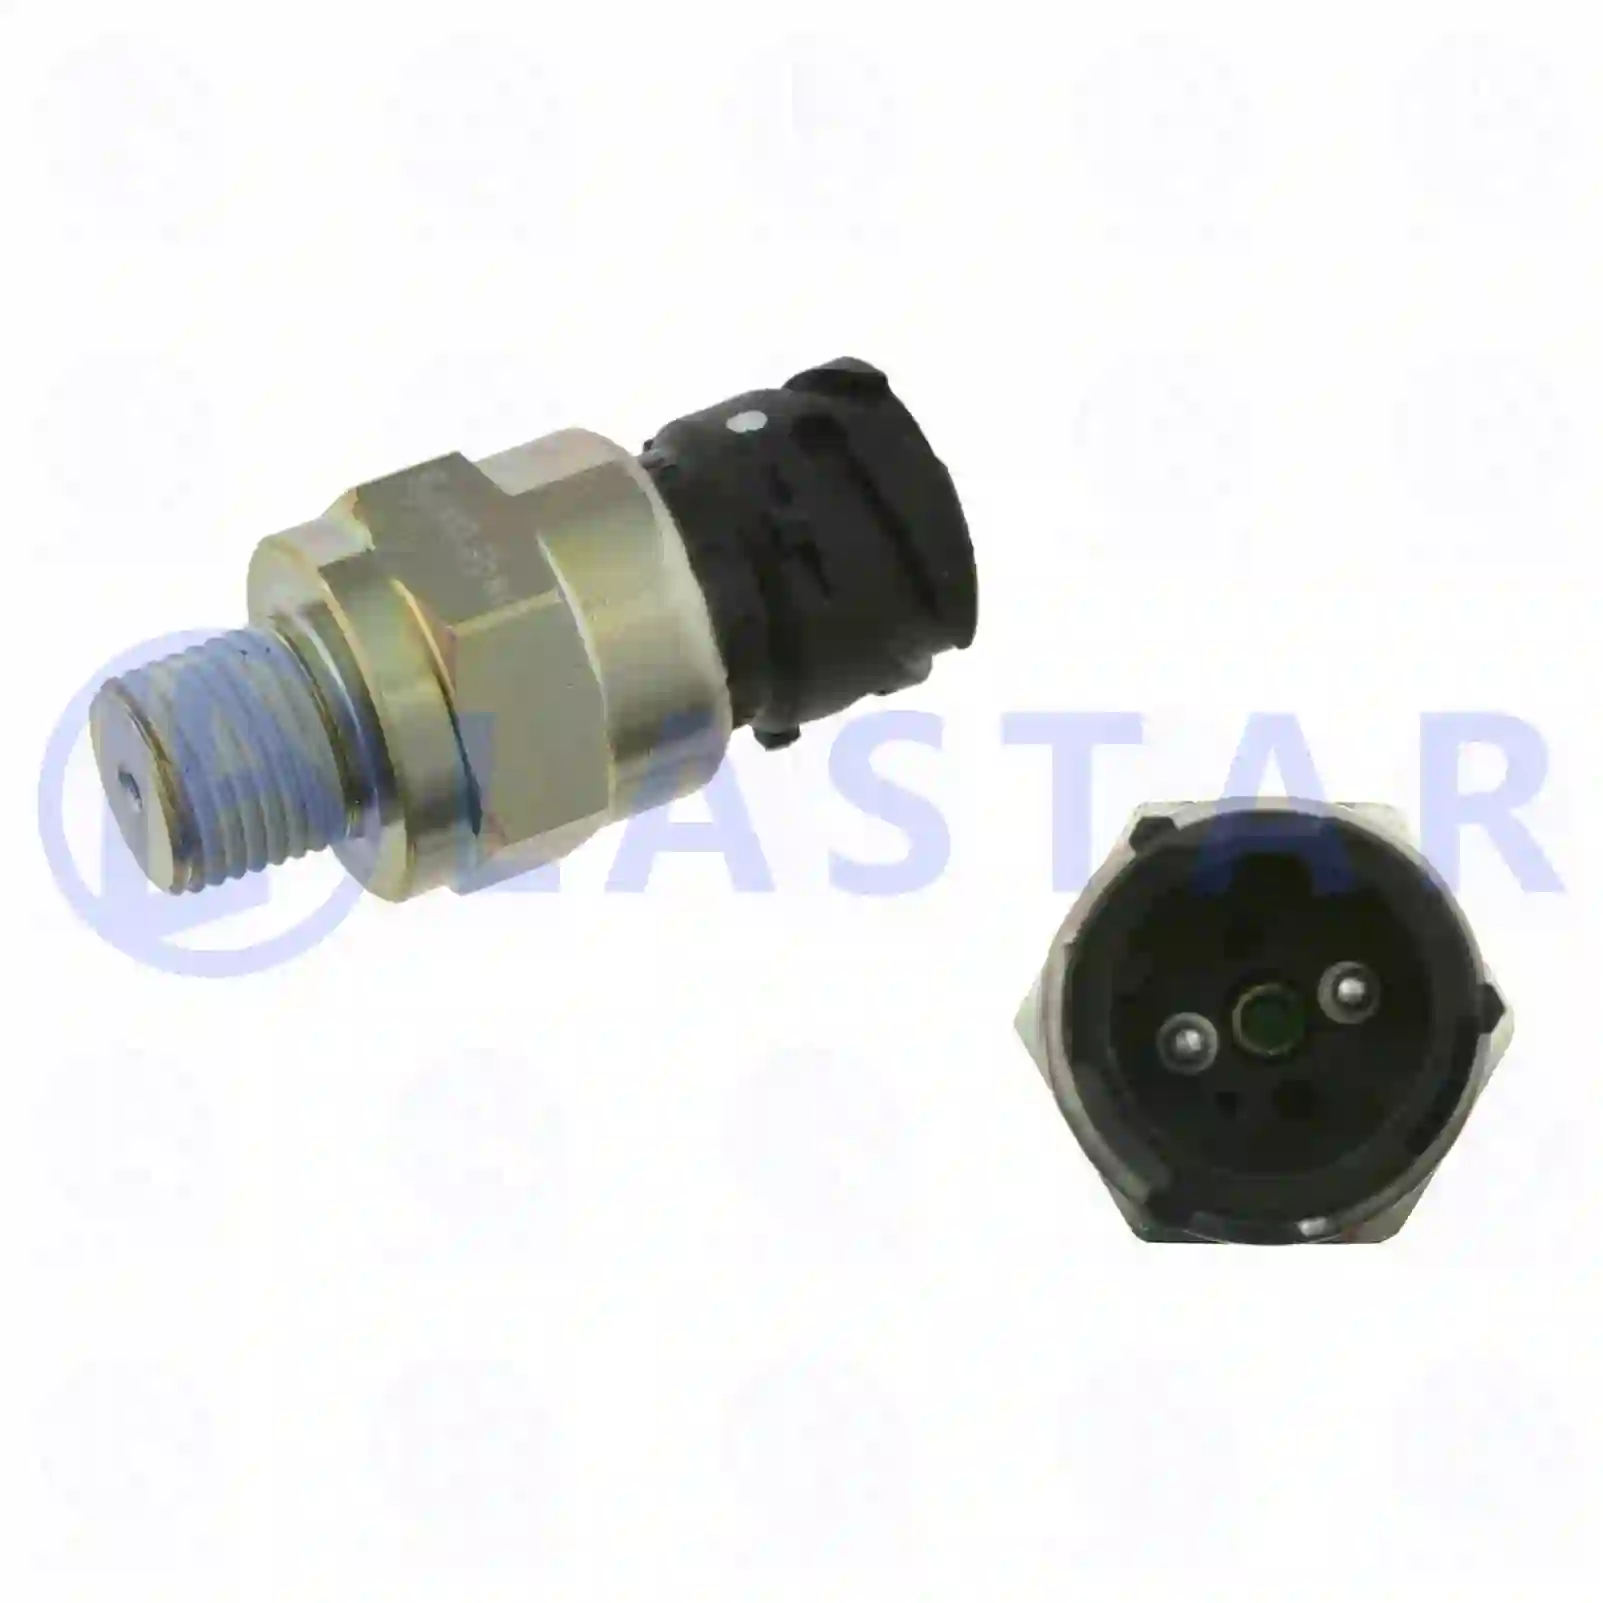  Pressure switch, with adapter cable || Lastar Spare Part | Truck Spare Parts, Auotomotive Spare Parts